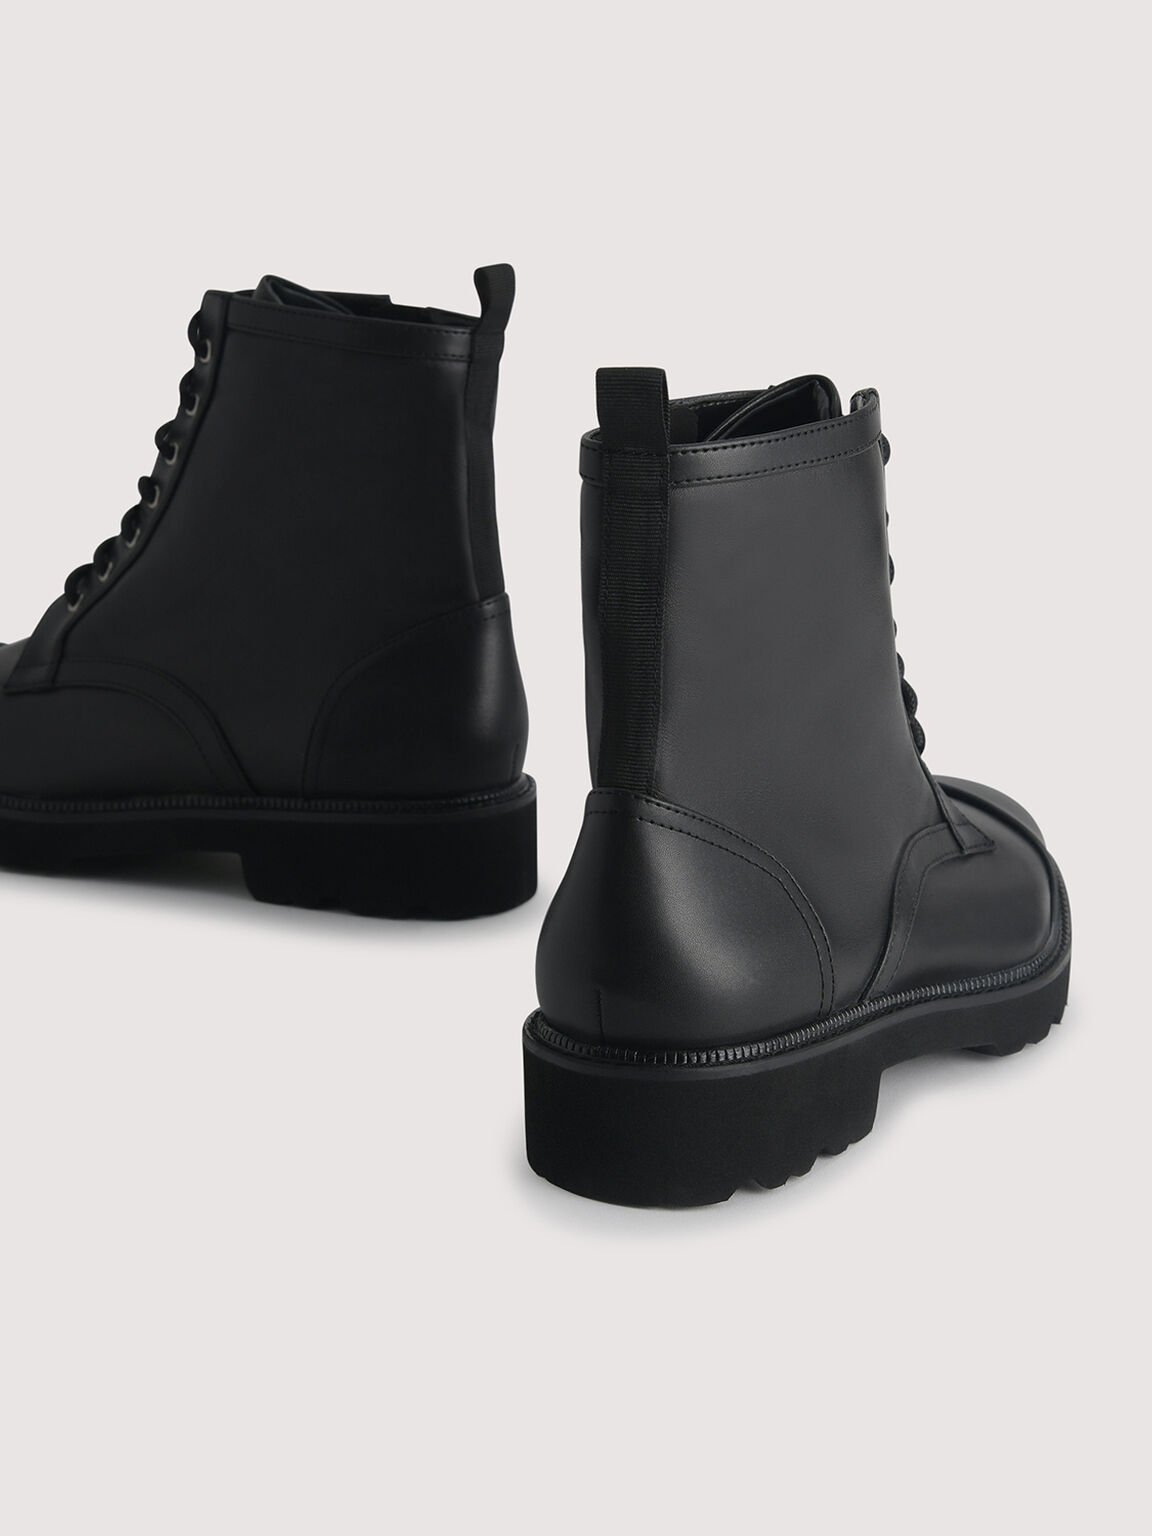 Leather Lace Up Boots, Black2, hi-res